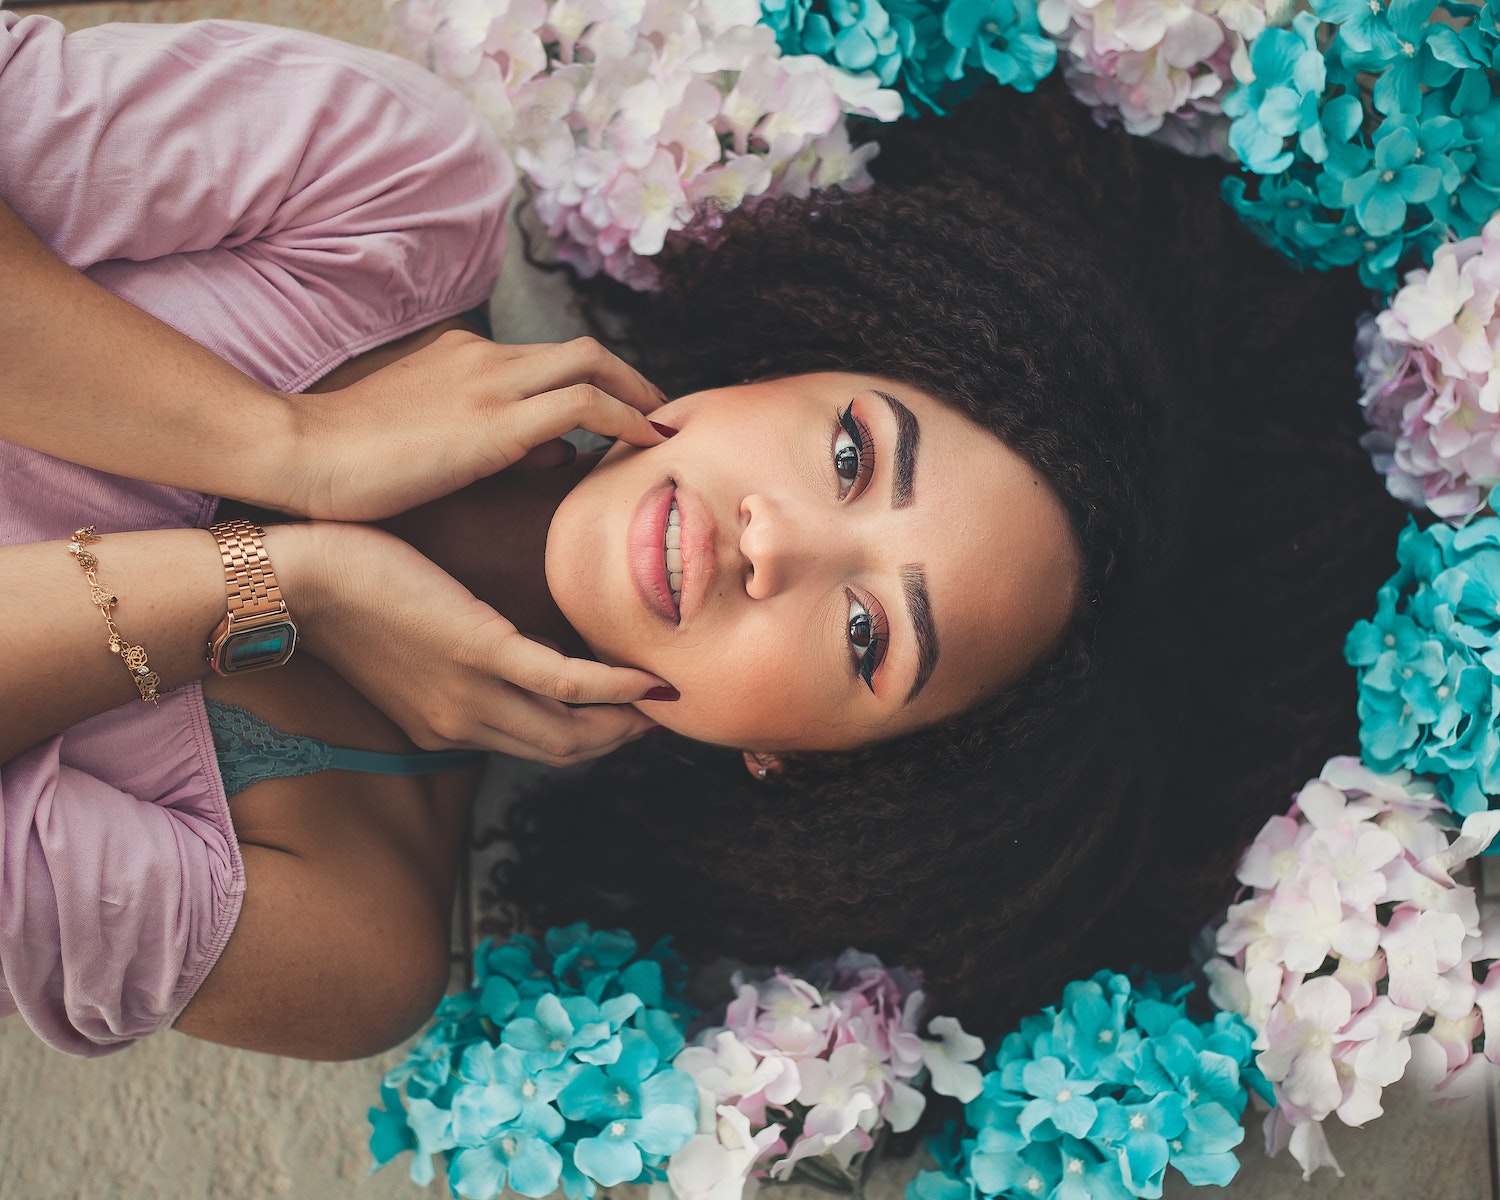 Woman Lying on White Surface With White and Teal Paper Flower Around Her Head